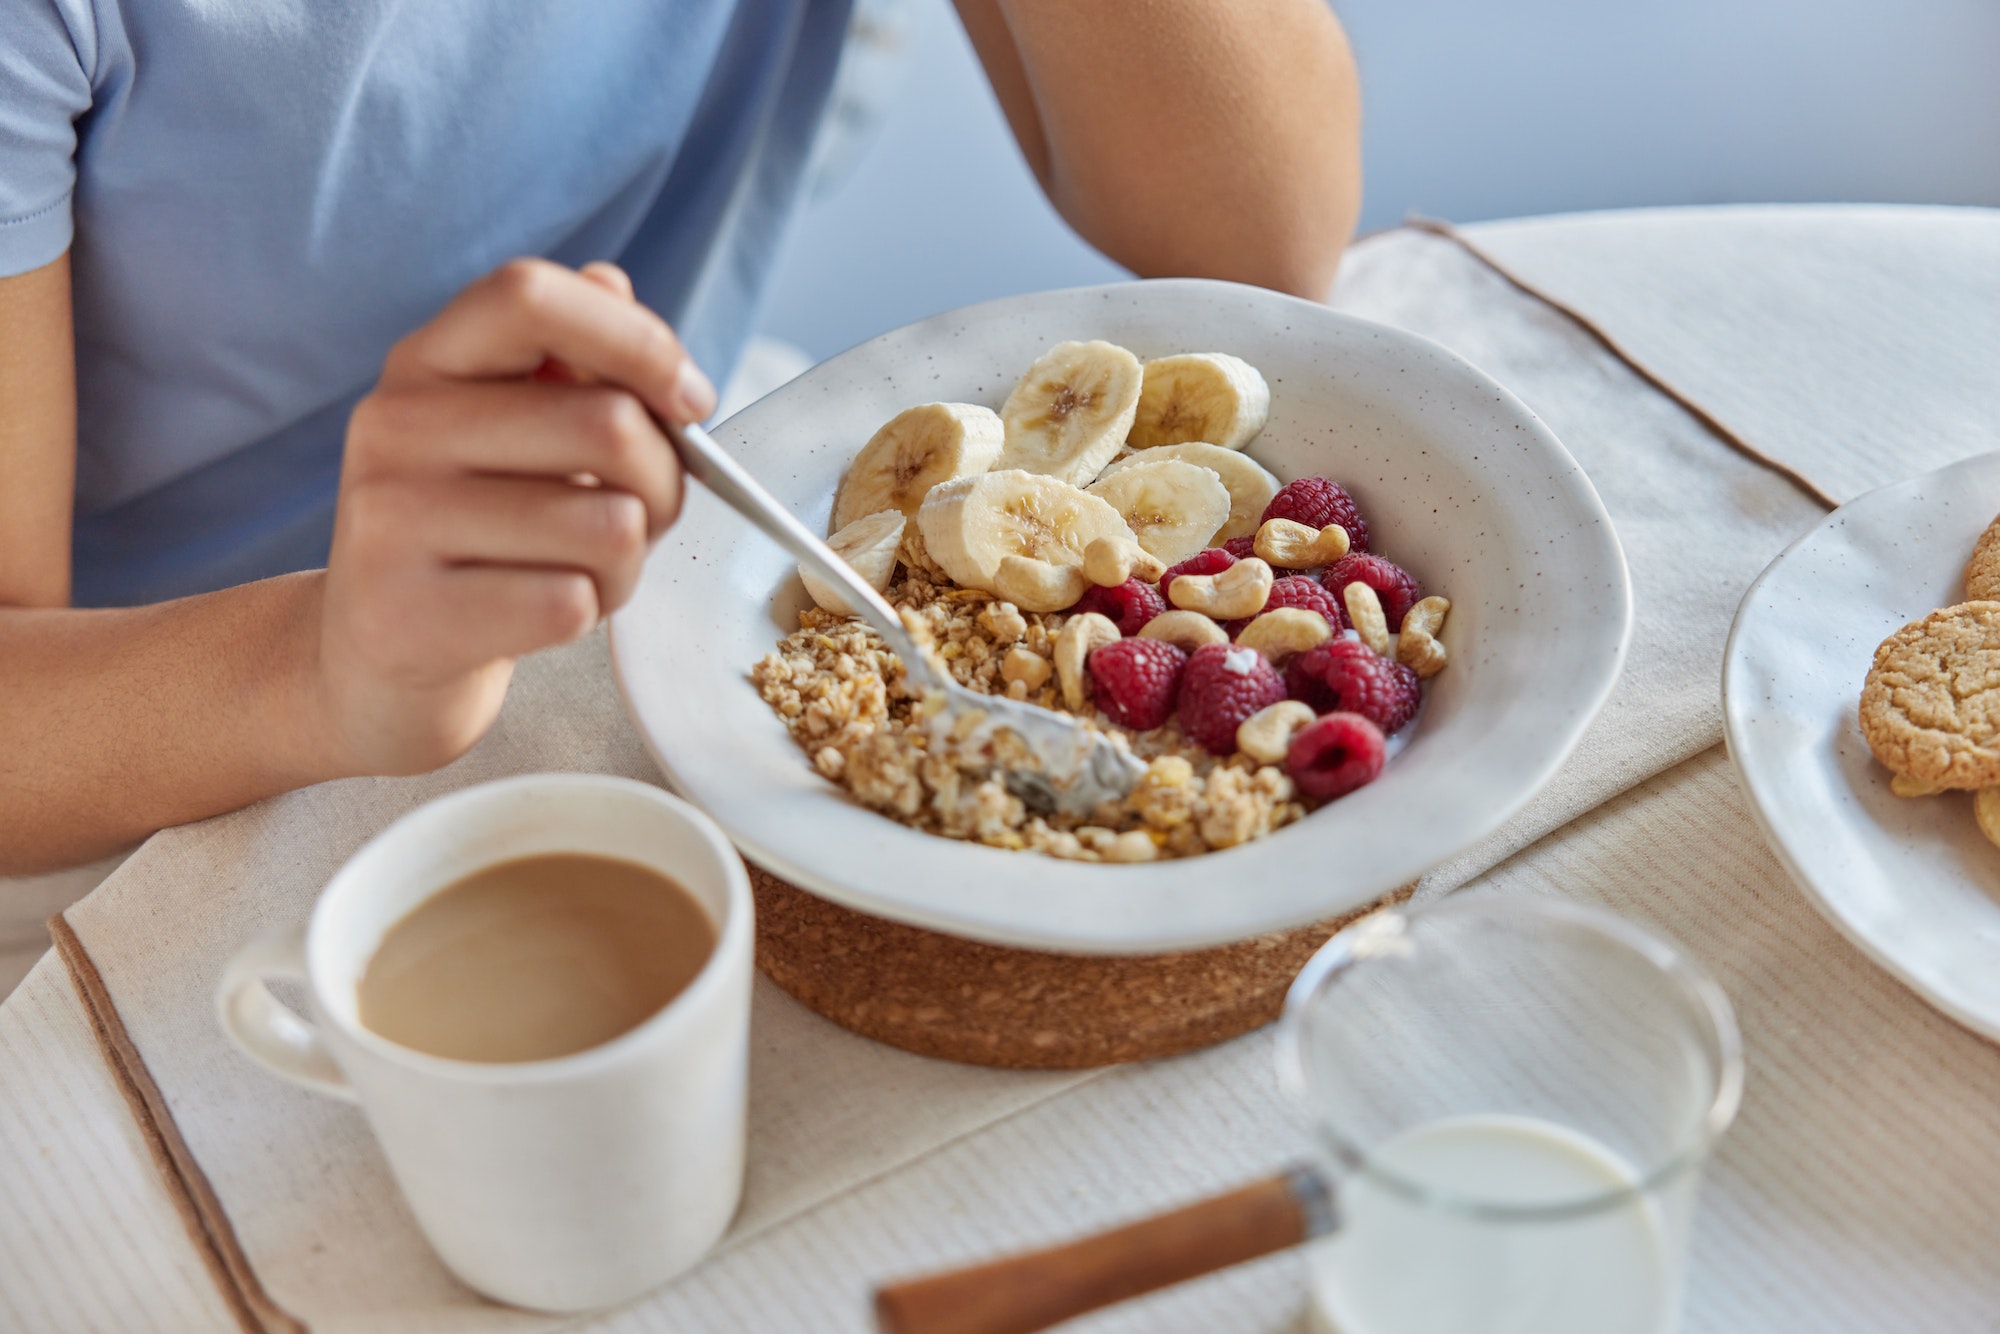 Healthy nutrition and proper nutrition concept. Unknown person enjoys oatmeal with fruits keeps to